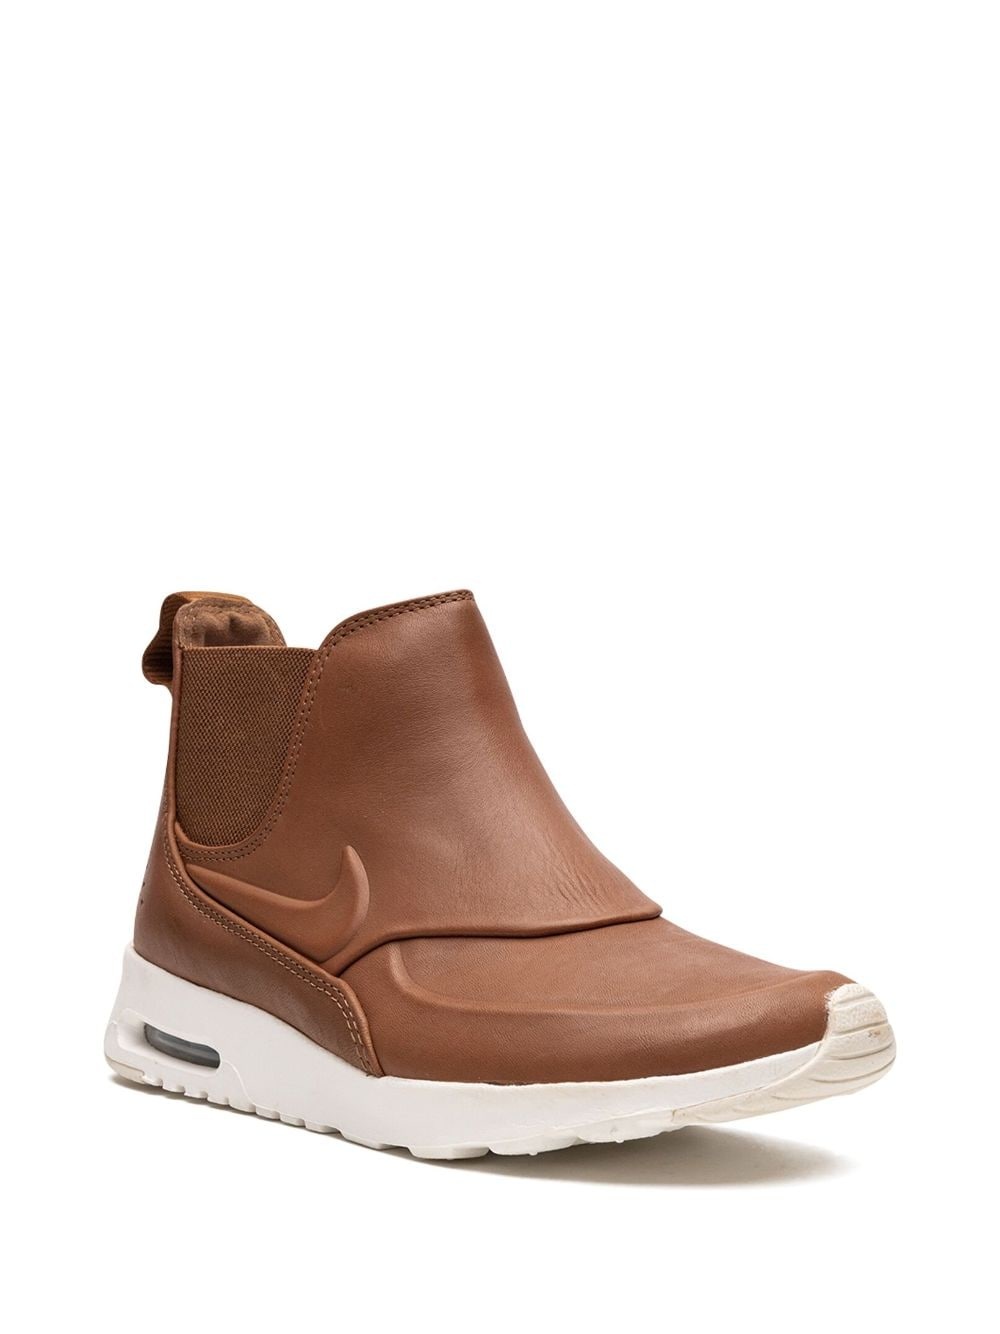 Air Max Thea Mid "Ale Brown" sneakers - 2